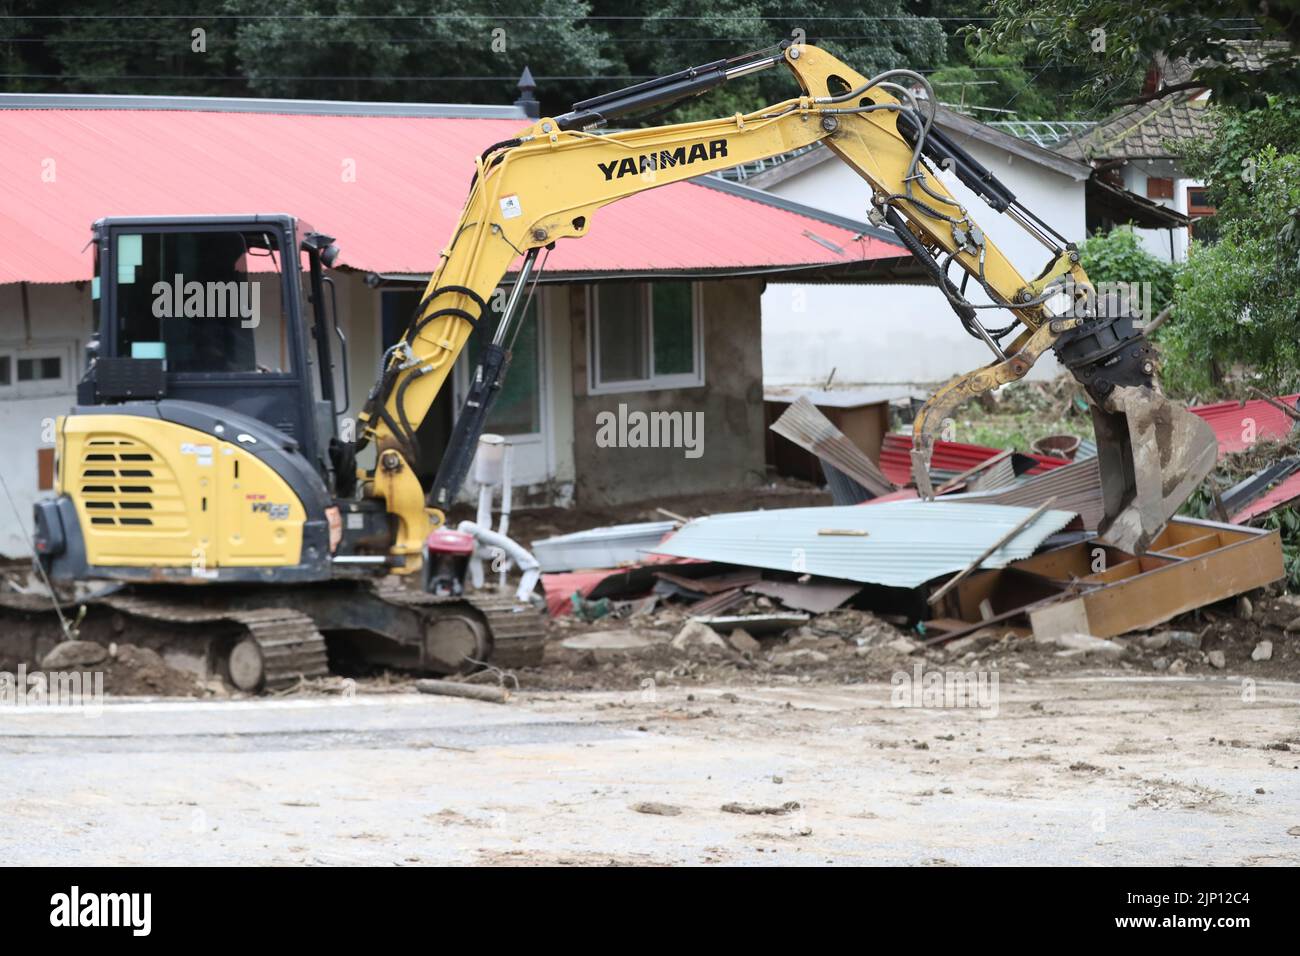 15th Aug, 2022. Restoration after landslide An excavator conducts restoration work at a residential town in Buyeo, South Chungcheong Province, after overnight heavy rainfalls caused a landslide that damaged several houses on Aug. 15, 2022. Credit: Yonhap/Newcom/Alamy Live News Stock Photo